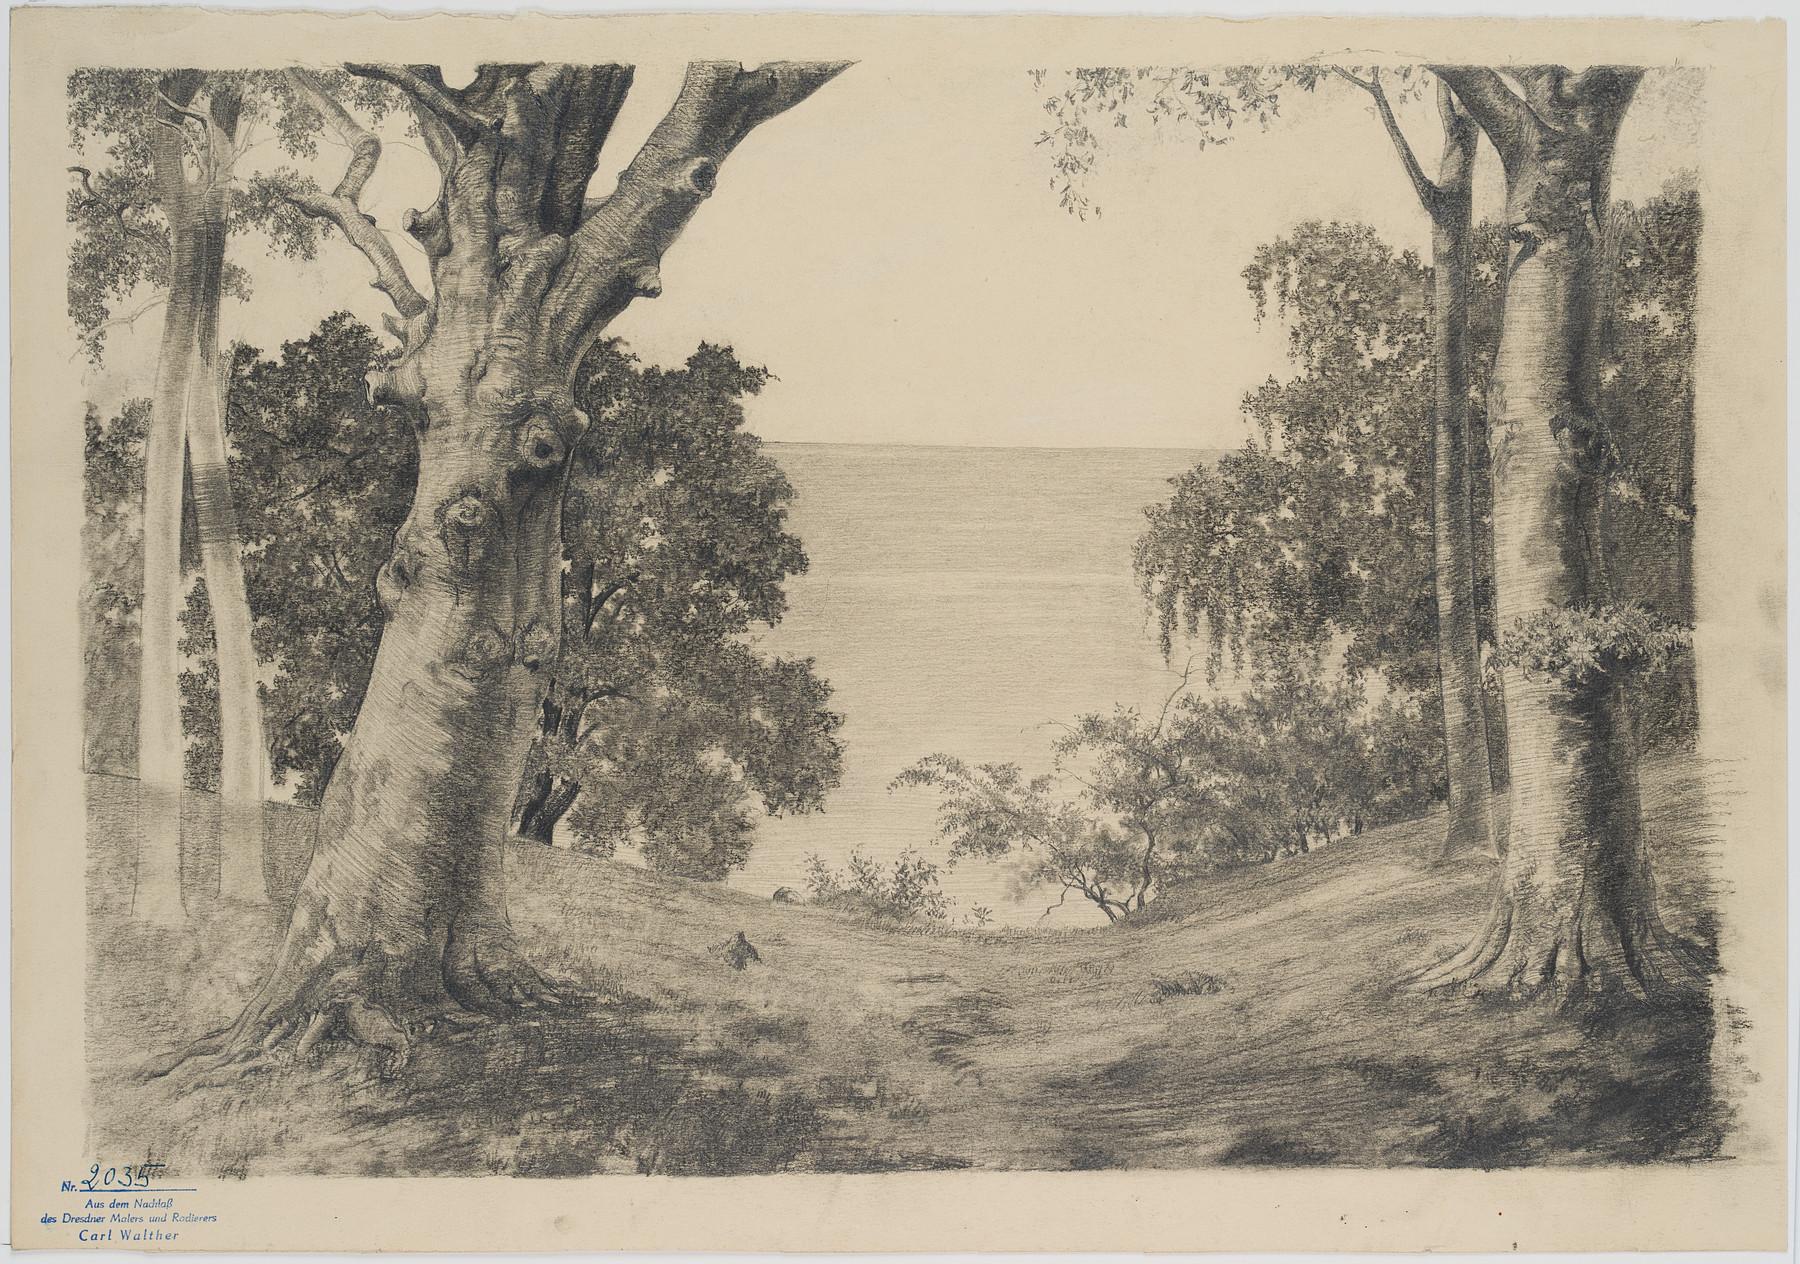 Landscape with trees by the sea - Art by Carl August Walther